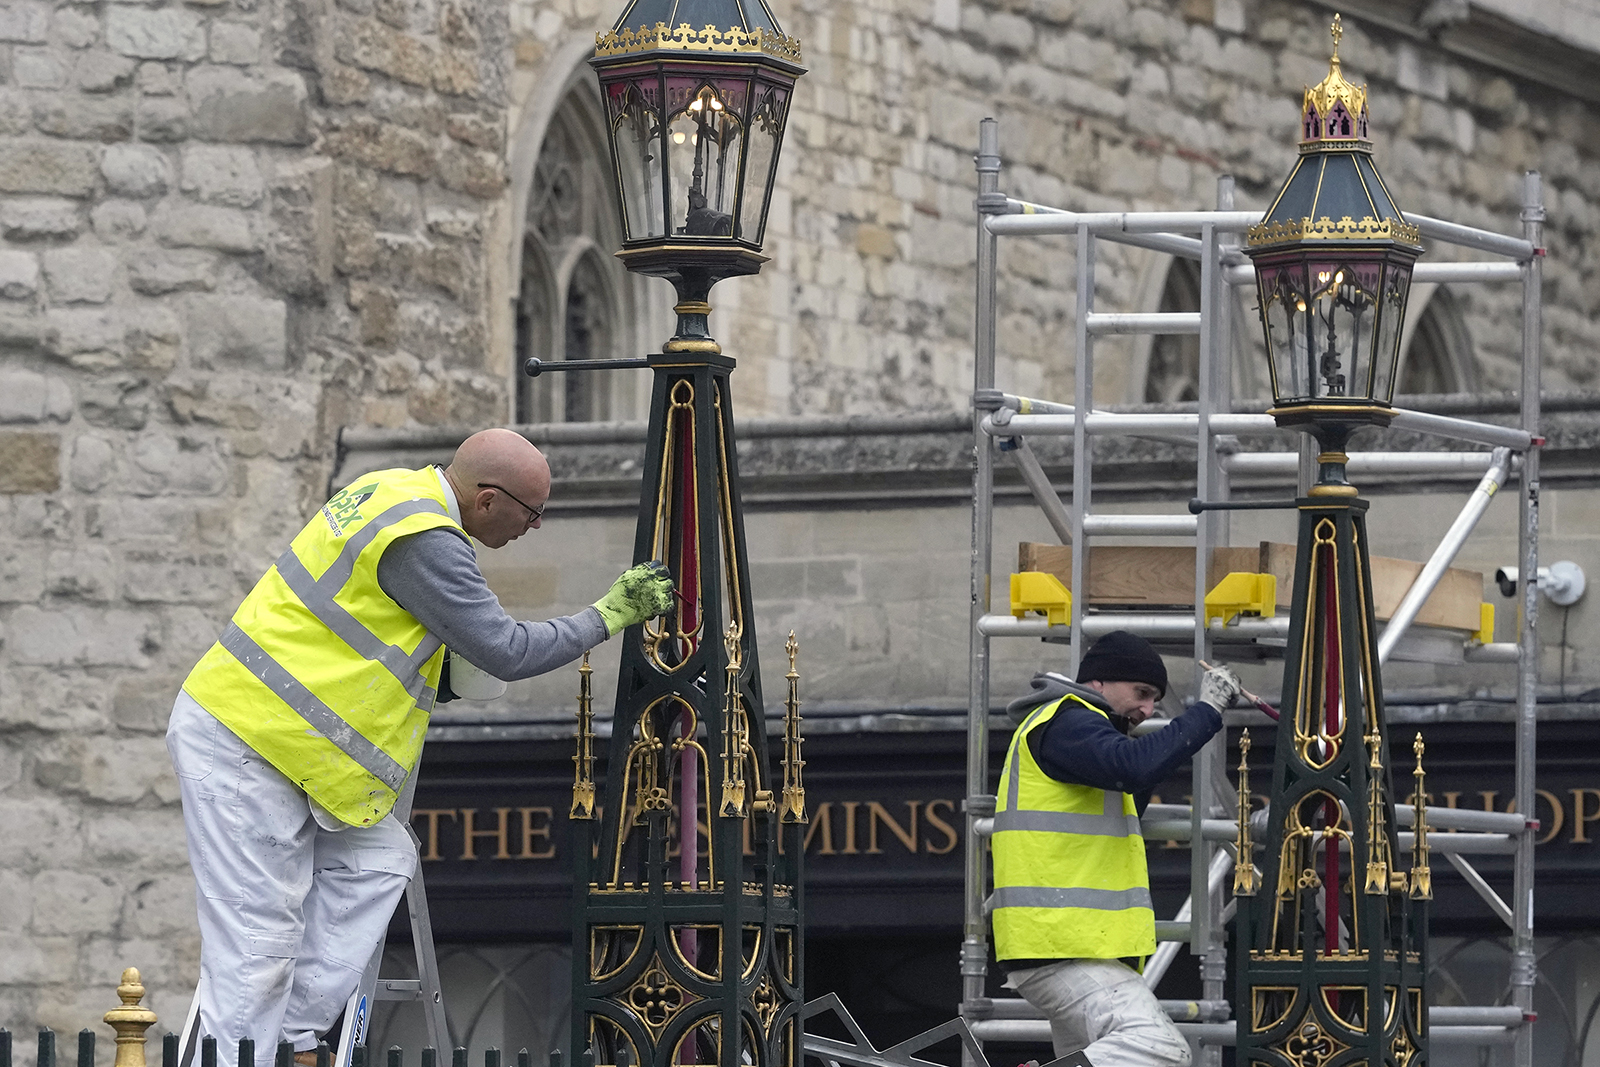 Painters repaint the lamp posts outside Westminster Abbey as preparations continue for the Coronation of King Charles III in London, Britain, Thursday, April 27, 2023. The Coronation of King Charles III will take place in Westminster Abbey, followed by a balcony appearance in Buckingham Palace on May 6, 2023. (AP Photo/Alastair Grant)